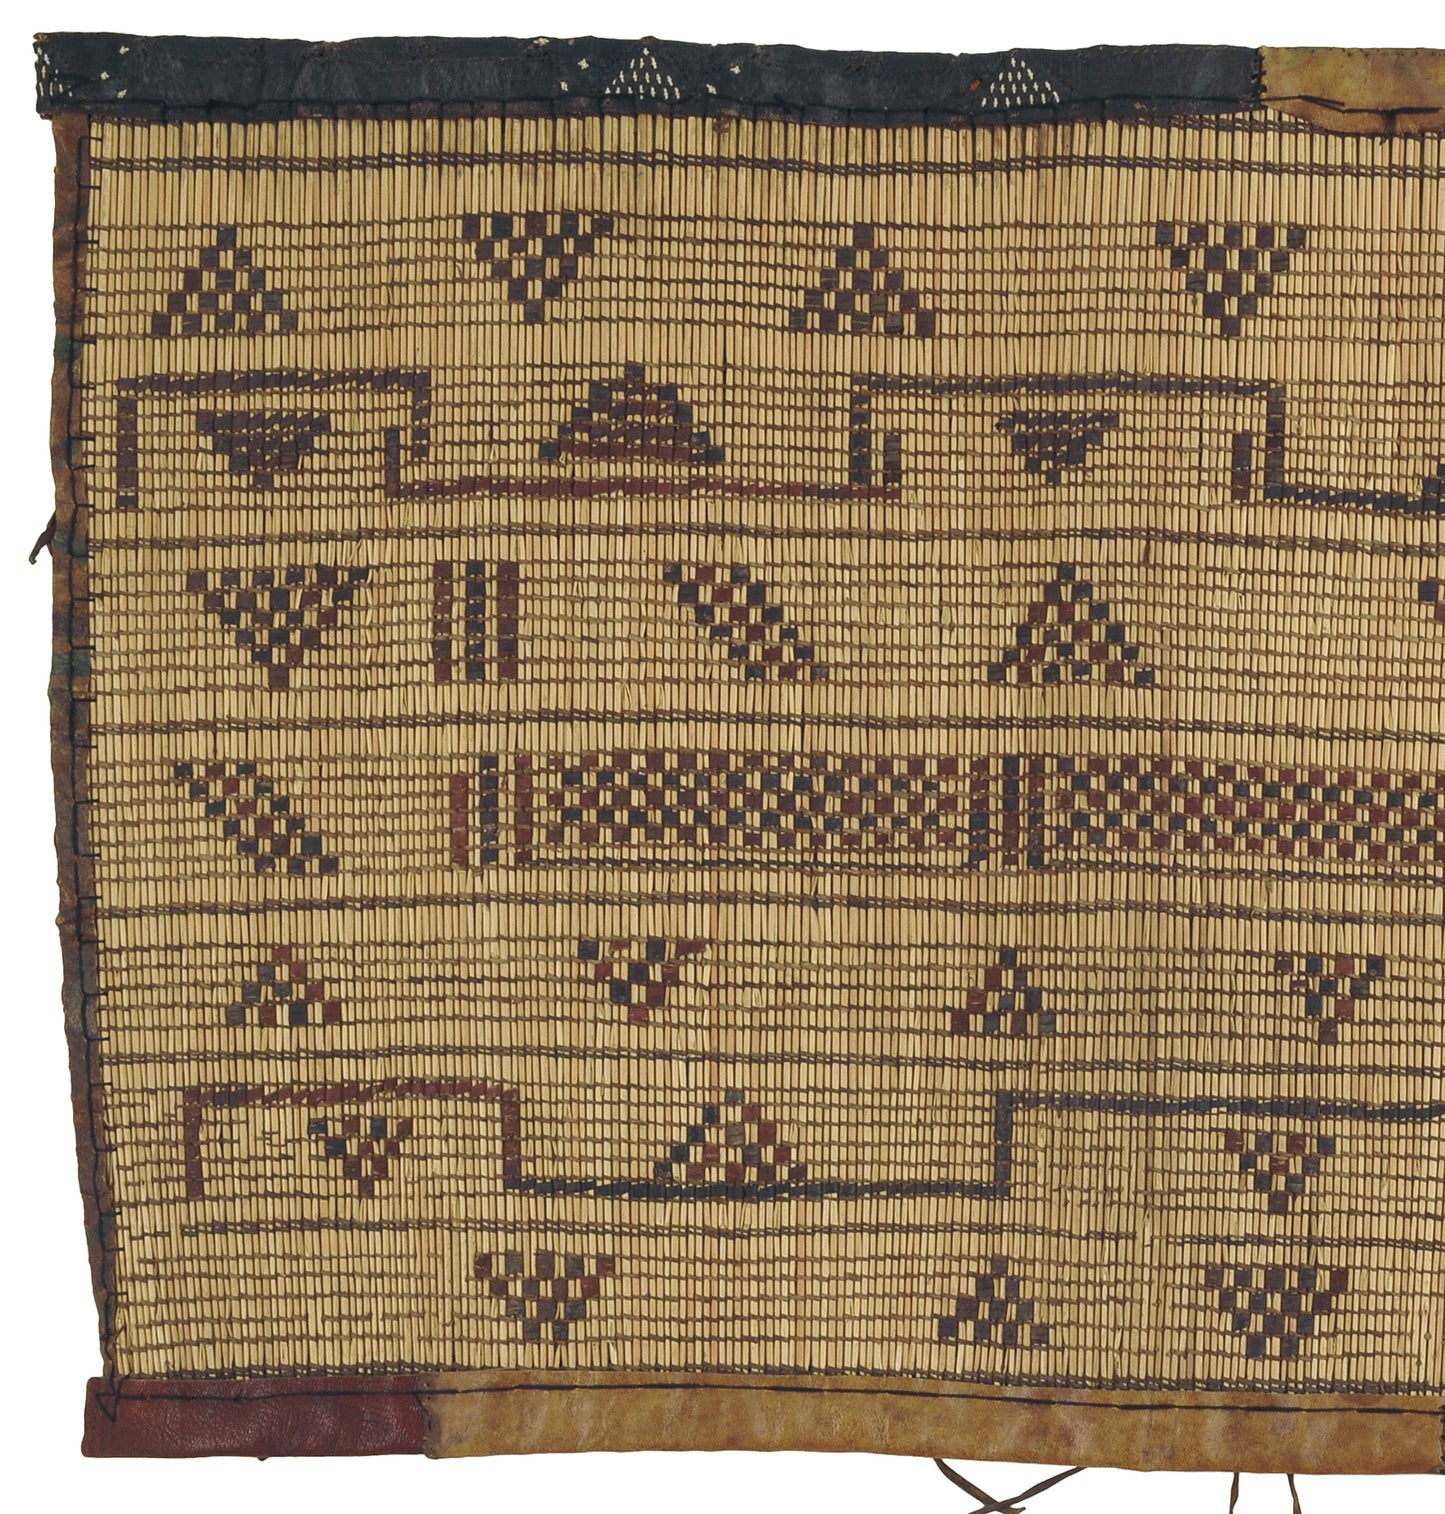 Authentic Tuareg Straw Mat from Niger - A Piece of African Saharan Heritage